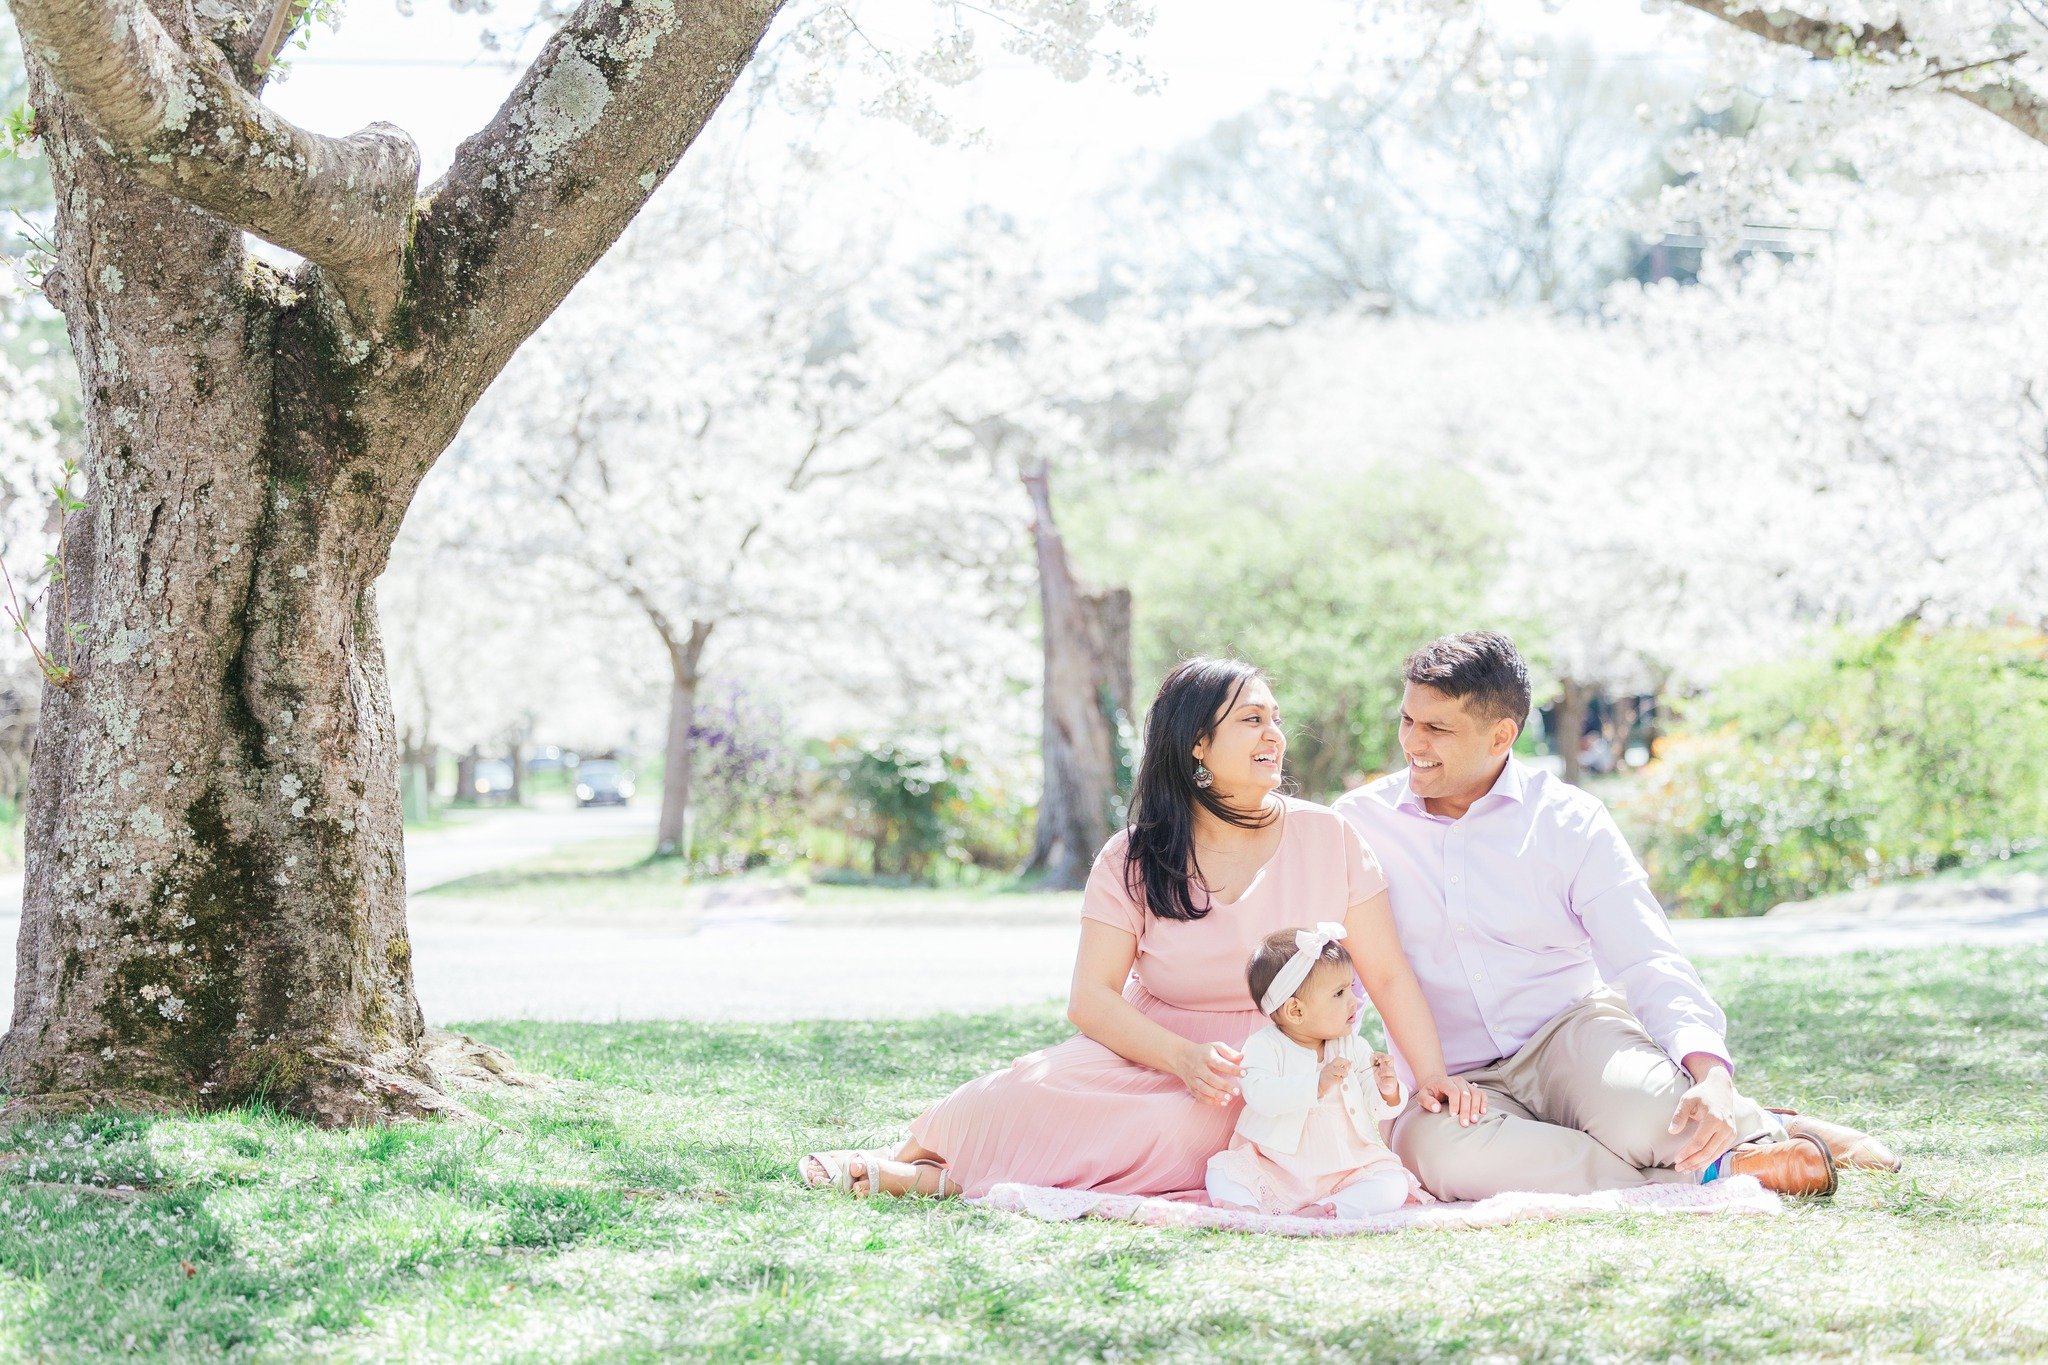 Basking in a cloud of pink blossoms....

.
.
.
.
.
#ginnyfilerphotography #gfpfamilies #familyphotography #dmvfamilyphotographer #marylandfamilyphotographer #kids #blessing #washpost #huffpostgram #portrait #familysession #familyphotographer  #washin